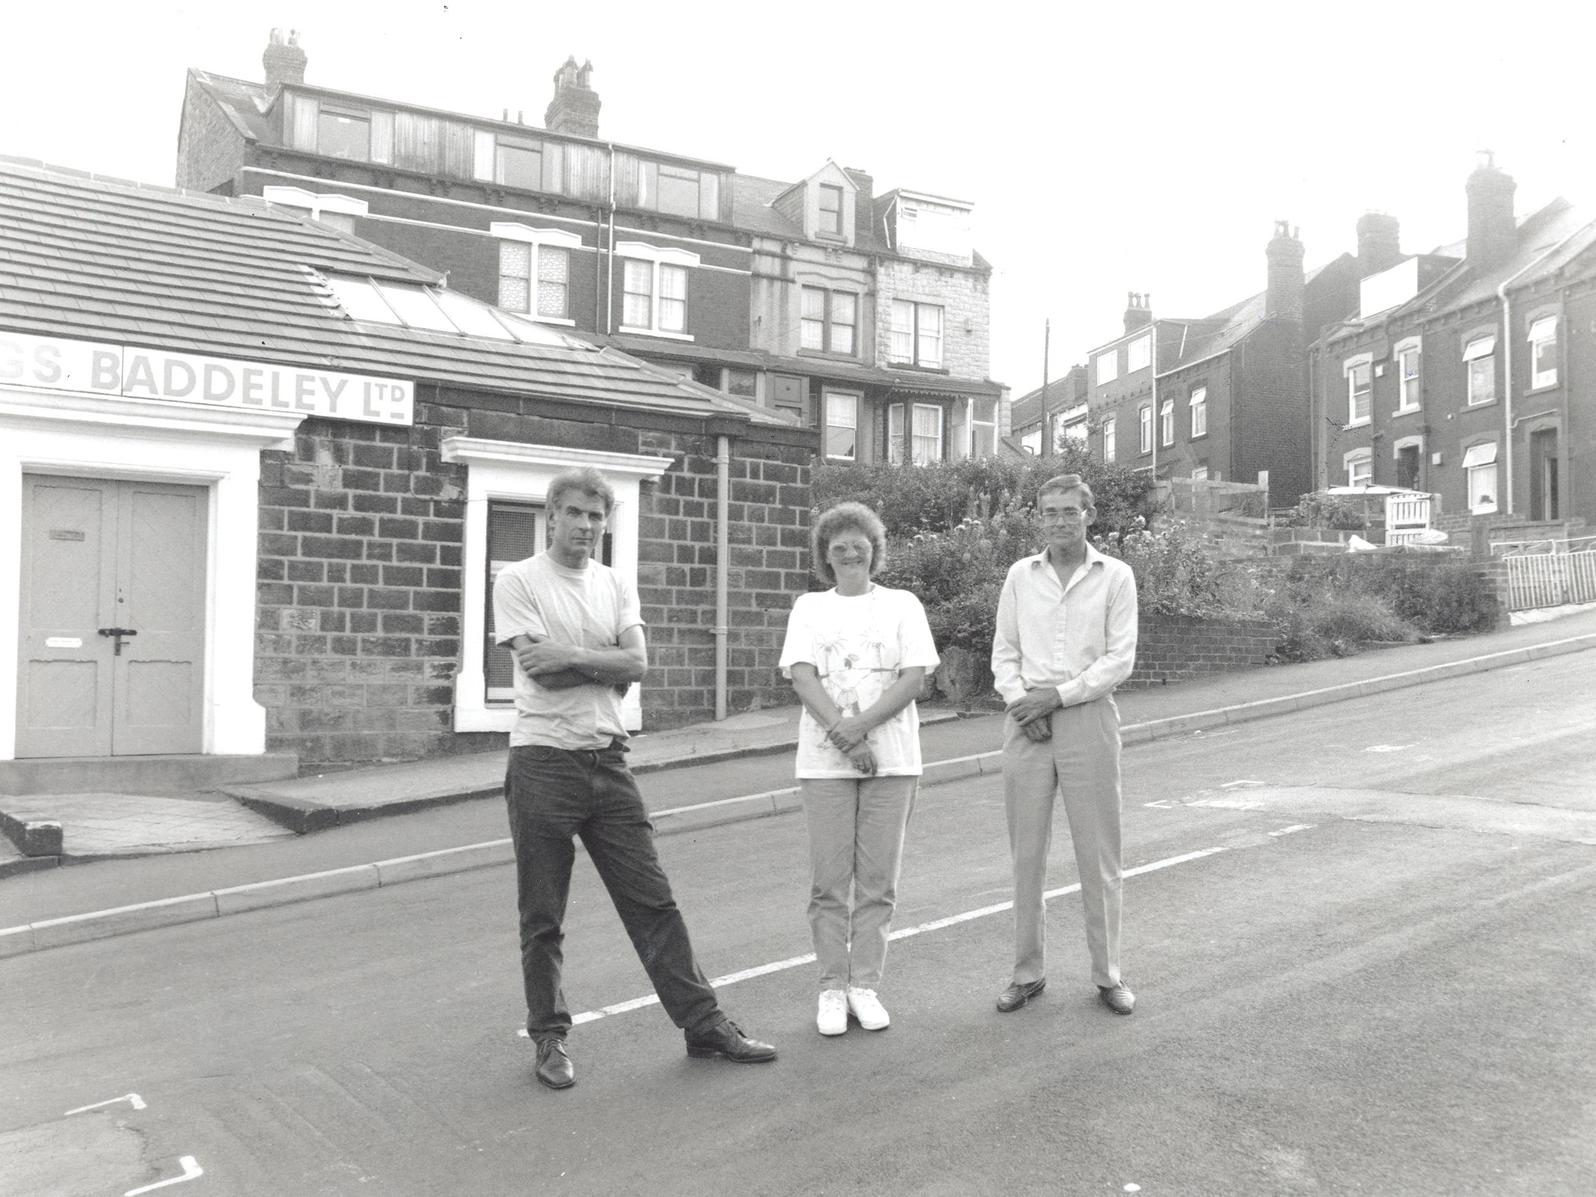 Remember Armley campaigners John McMullen, Diane Ackroyd and Brian Hunt?